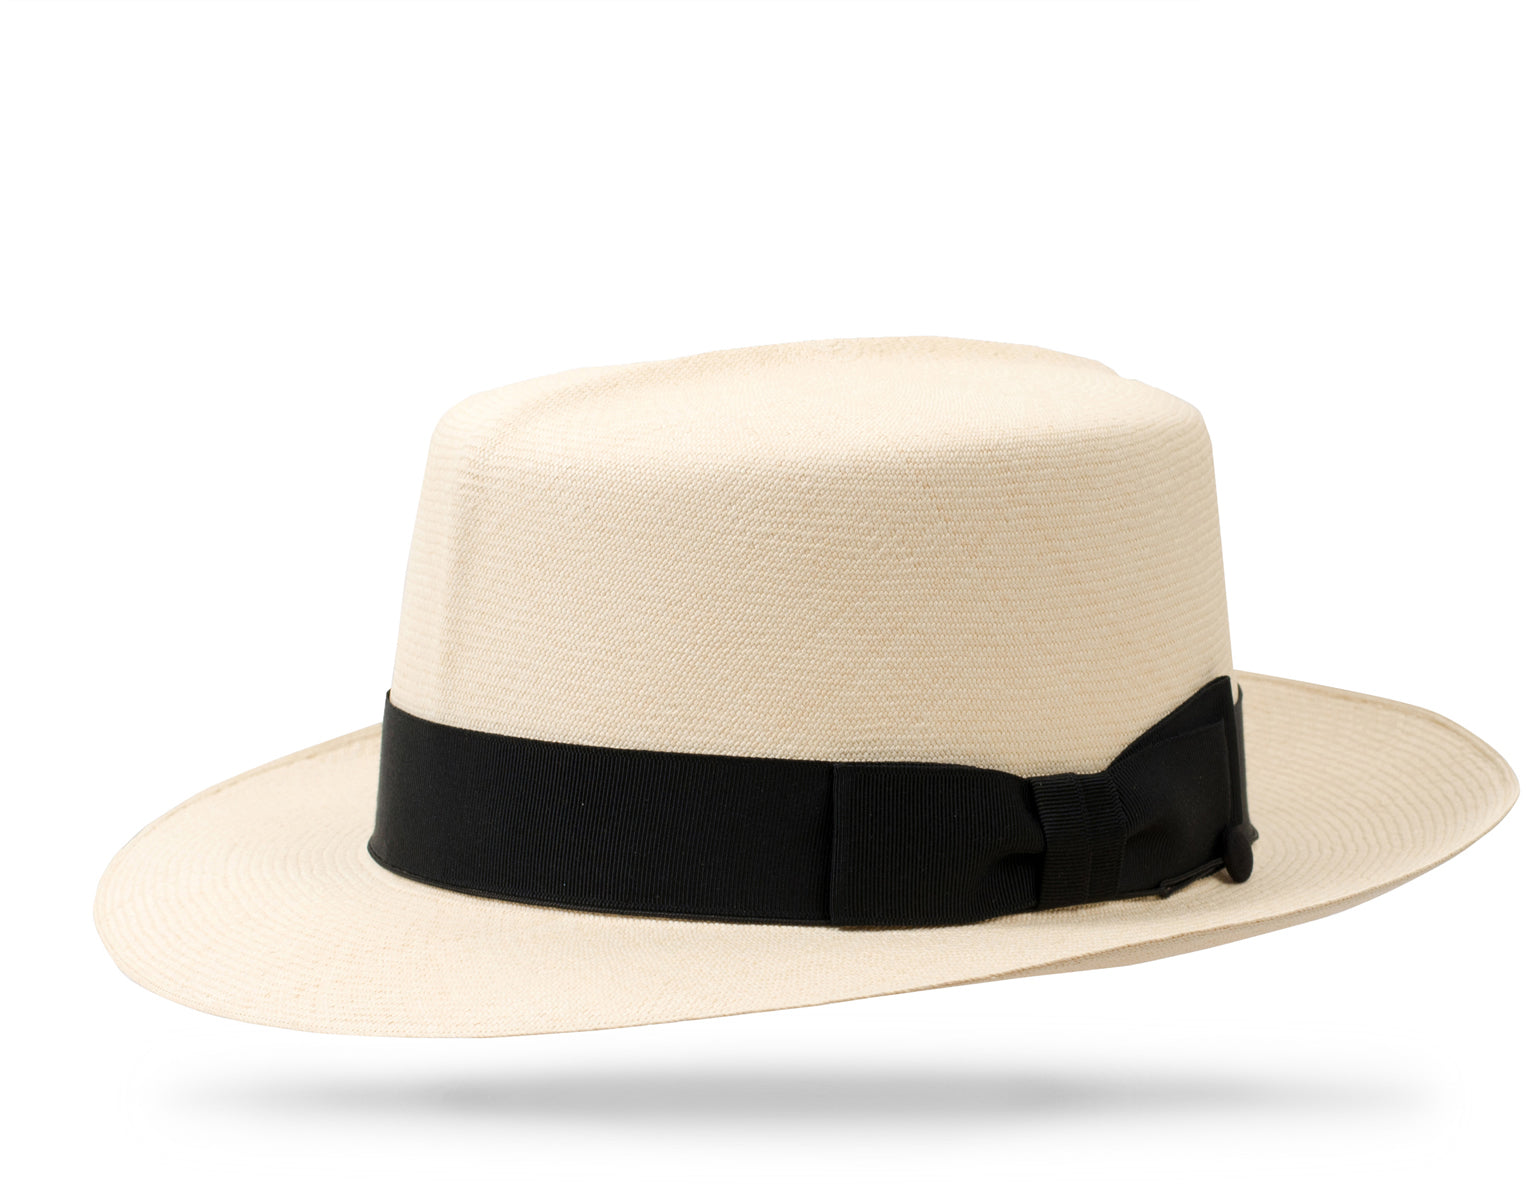 Design
With its Original English Roll-Up Shape our Montecristi optimo combines a 4 ¼” crown and a 2 ½” brim. Rarer than a perfect diamond and infinitely more refined, we are proud to carry the most exquisitely crafted Montecristi Panama hats in the world. Depending on the quality of the weave, a Worth & Worth Montecristi Panama Hat can take several months to weave by our master weavers in Ecuador. Available in four different qualities, the result is a hat with soft texture, translucent appearance and luminous ivory color.
Material
Montecristi Panama straw handwoven in Ecuador available in 4 different qualities: Artisan, Master, Museum and Superfino
Specifications
With its Original English Roll-Up Shape our Montecristi optimo combines a 4 ¼” crown and a 2 ½” brim. Handwoven by our master weavers in Ecuador Handcrafted in our atelier in NYC. Truly a work of art.